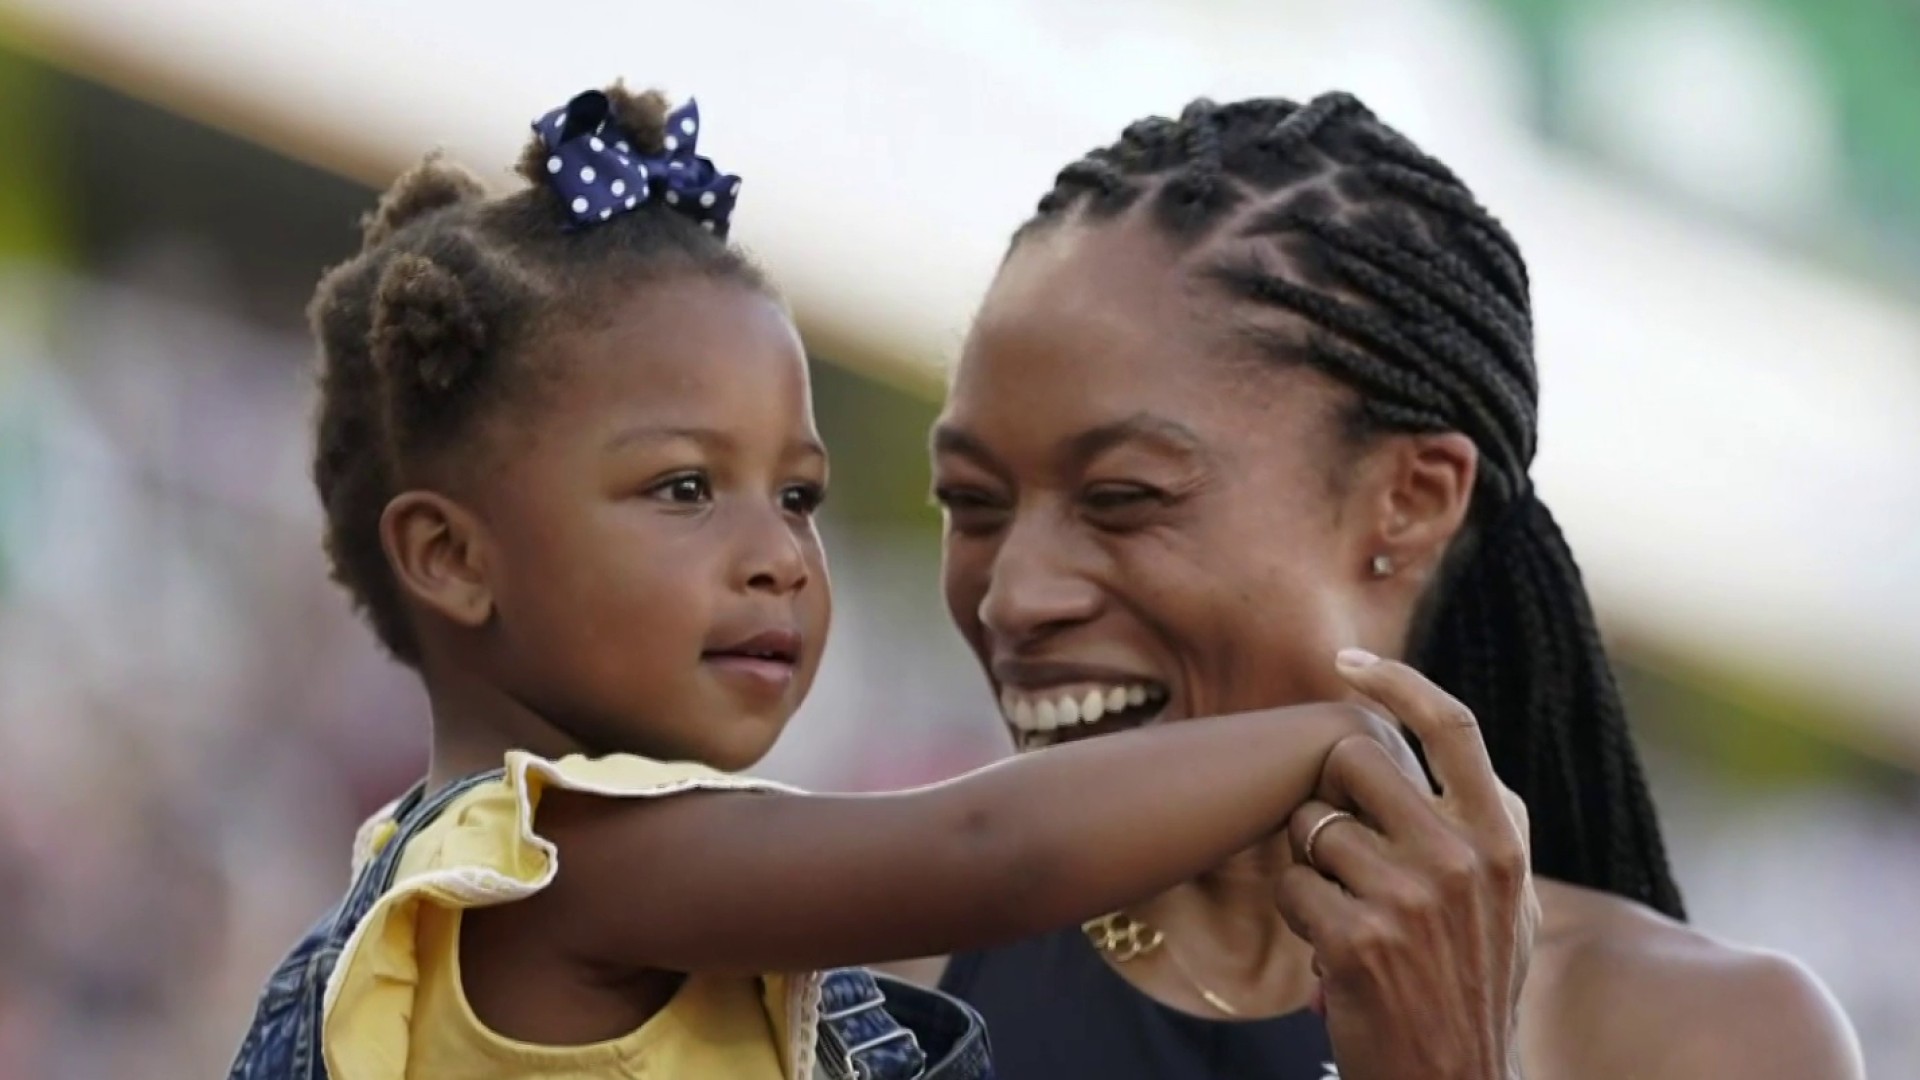 Allyson Felix becomes most decorated American track athlete in Olympic  history